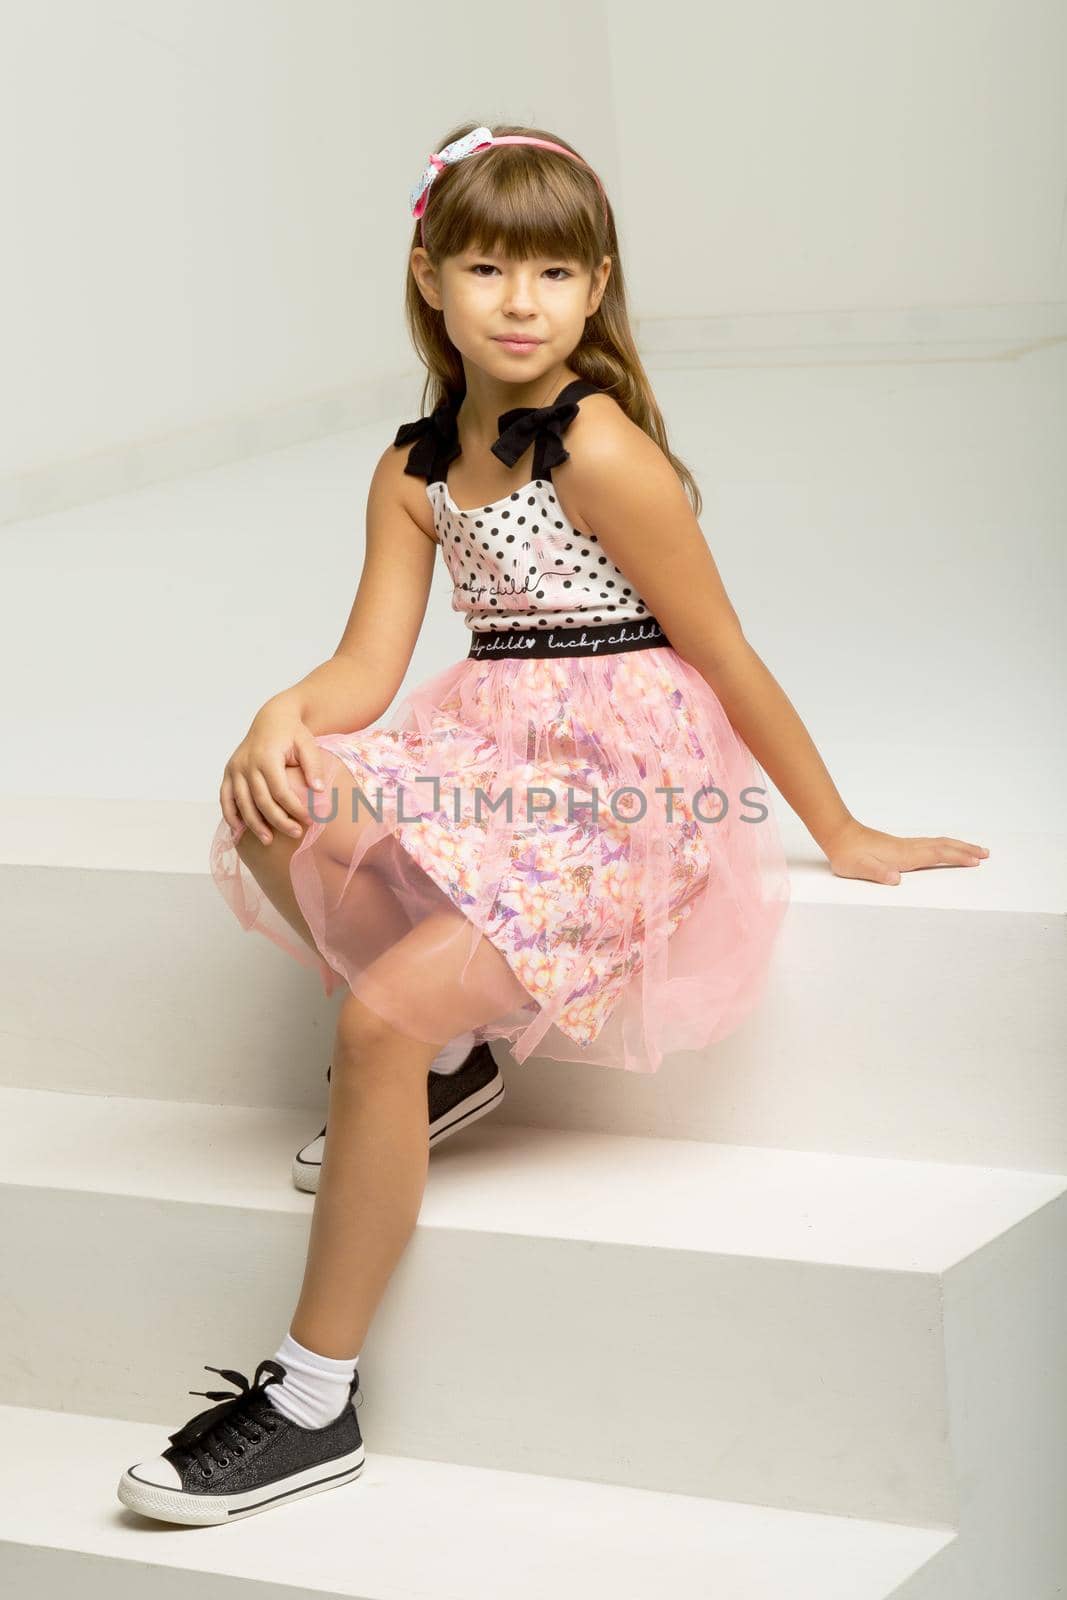 Stylish girl sitting on white staircase. Girl wearing nice dress and sneakers sitting on step leaning back on her hands and bowed her head. Beautiful child looking seriously at camera